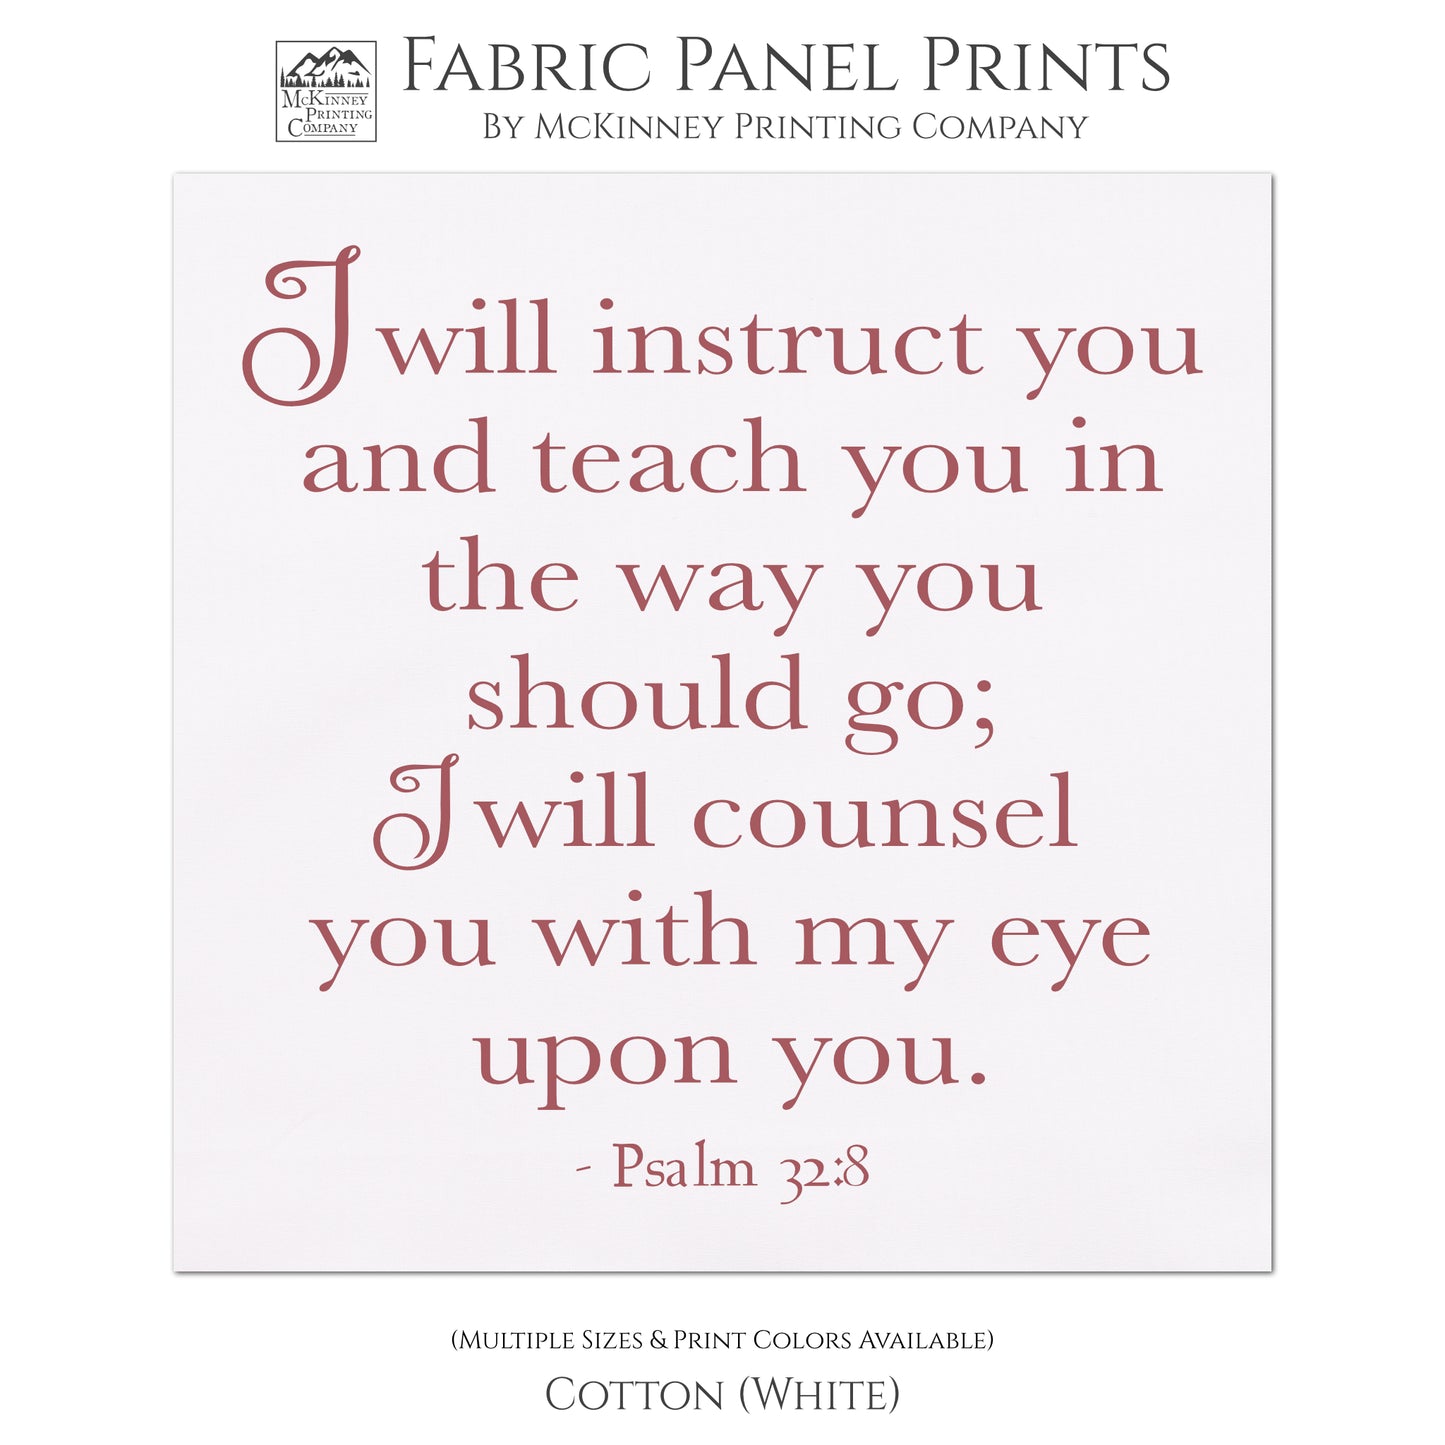 I will instruct you and teach you in the way you should go; I will counsel you with my eye upon you - Psalm 32 8 - Fabric Panel Print, Scripture Fabric, Religious Art, Quilt Block, Large Print Fabric - Cotton, White